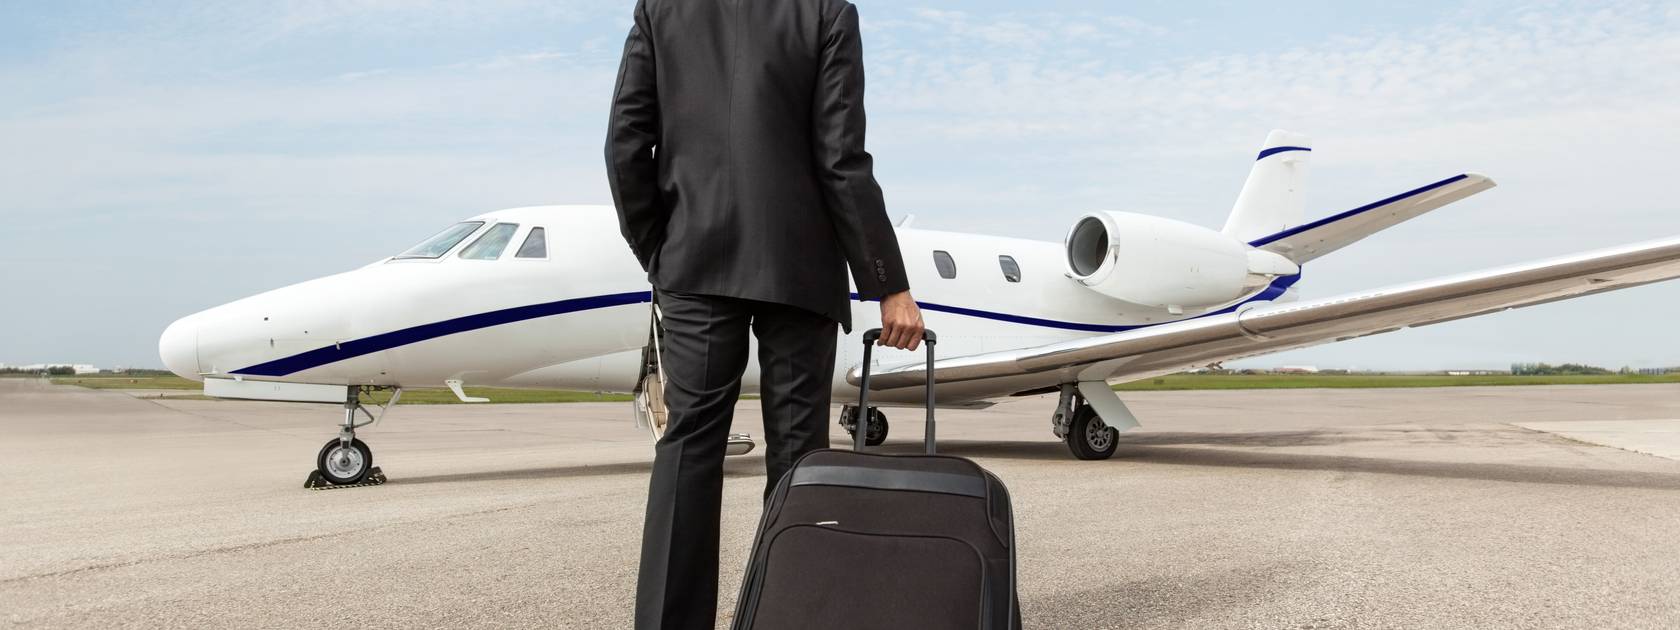 Man walking towards private jet on a runway while dragging a suitcase